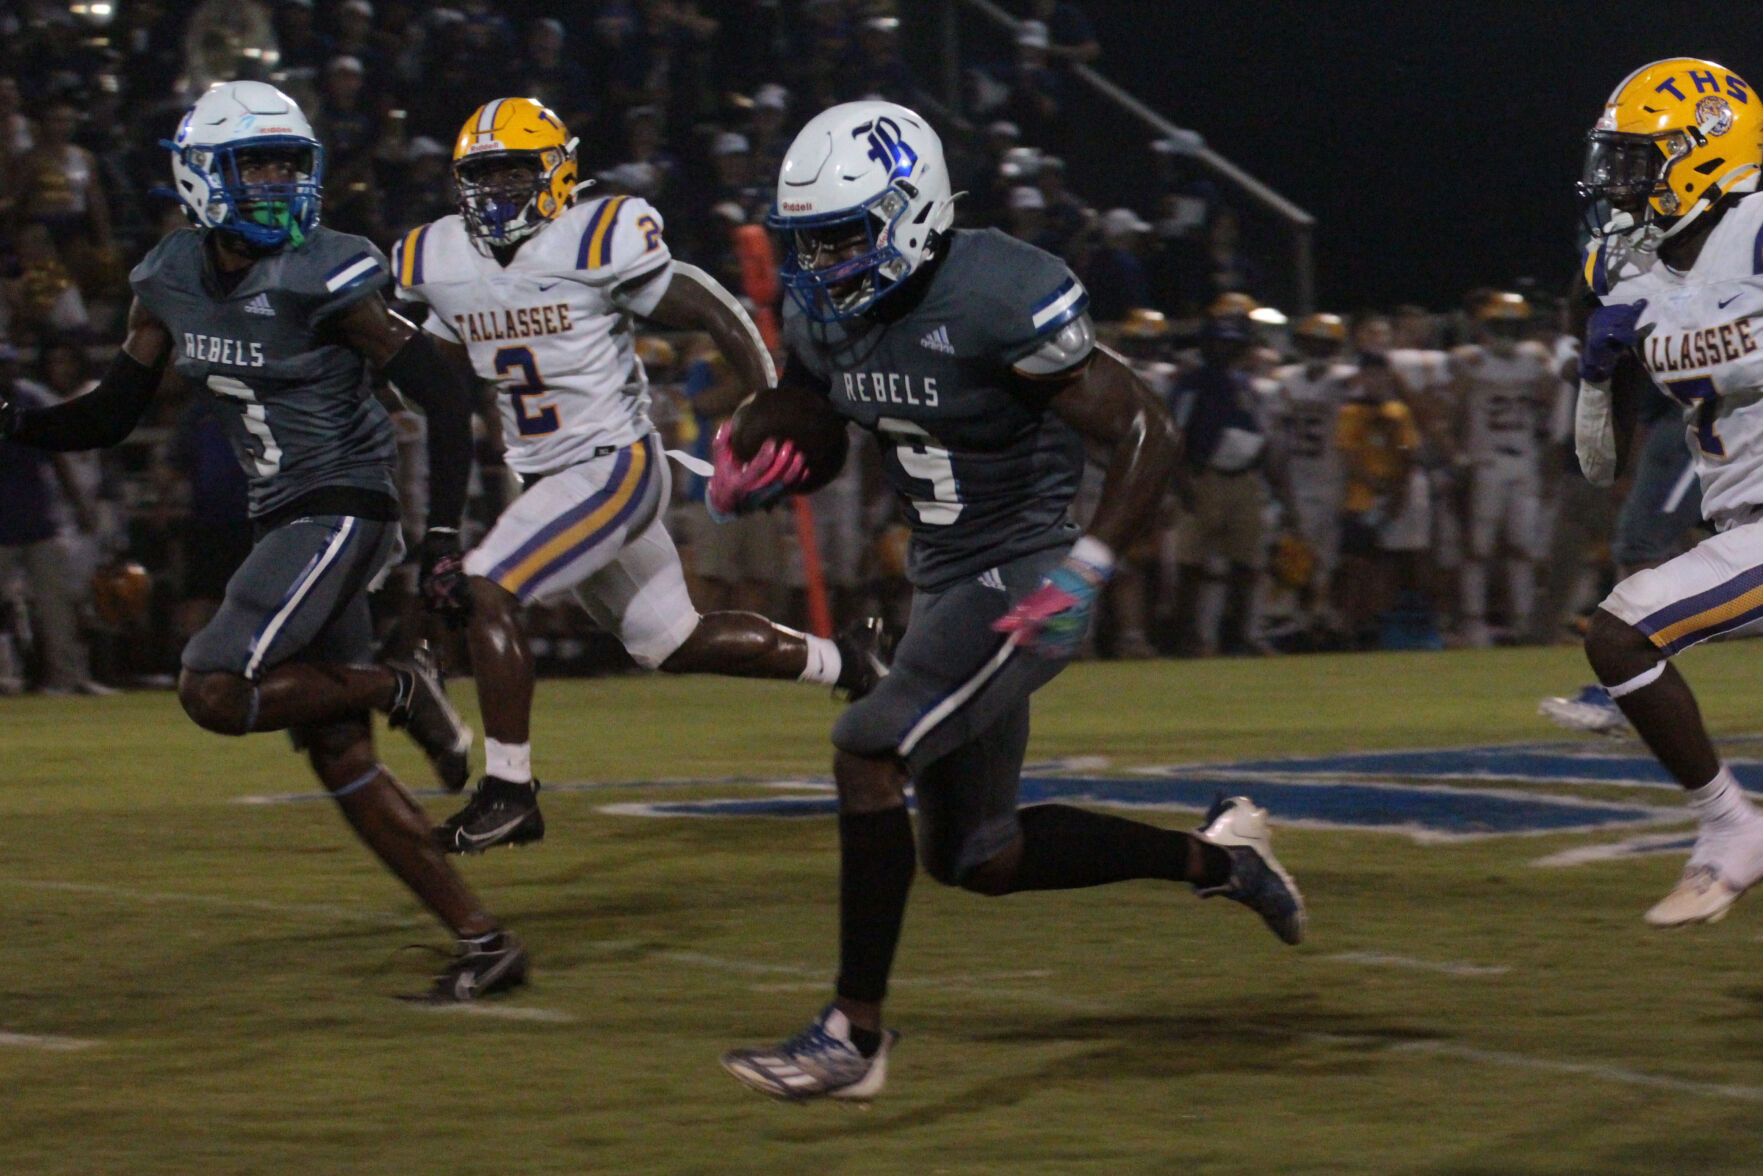 Reeltown dominates Tallassee 41-14 in thrilling rivalry game with star player Arthur Woods leading the way